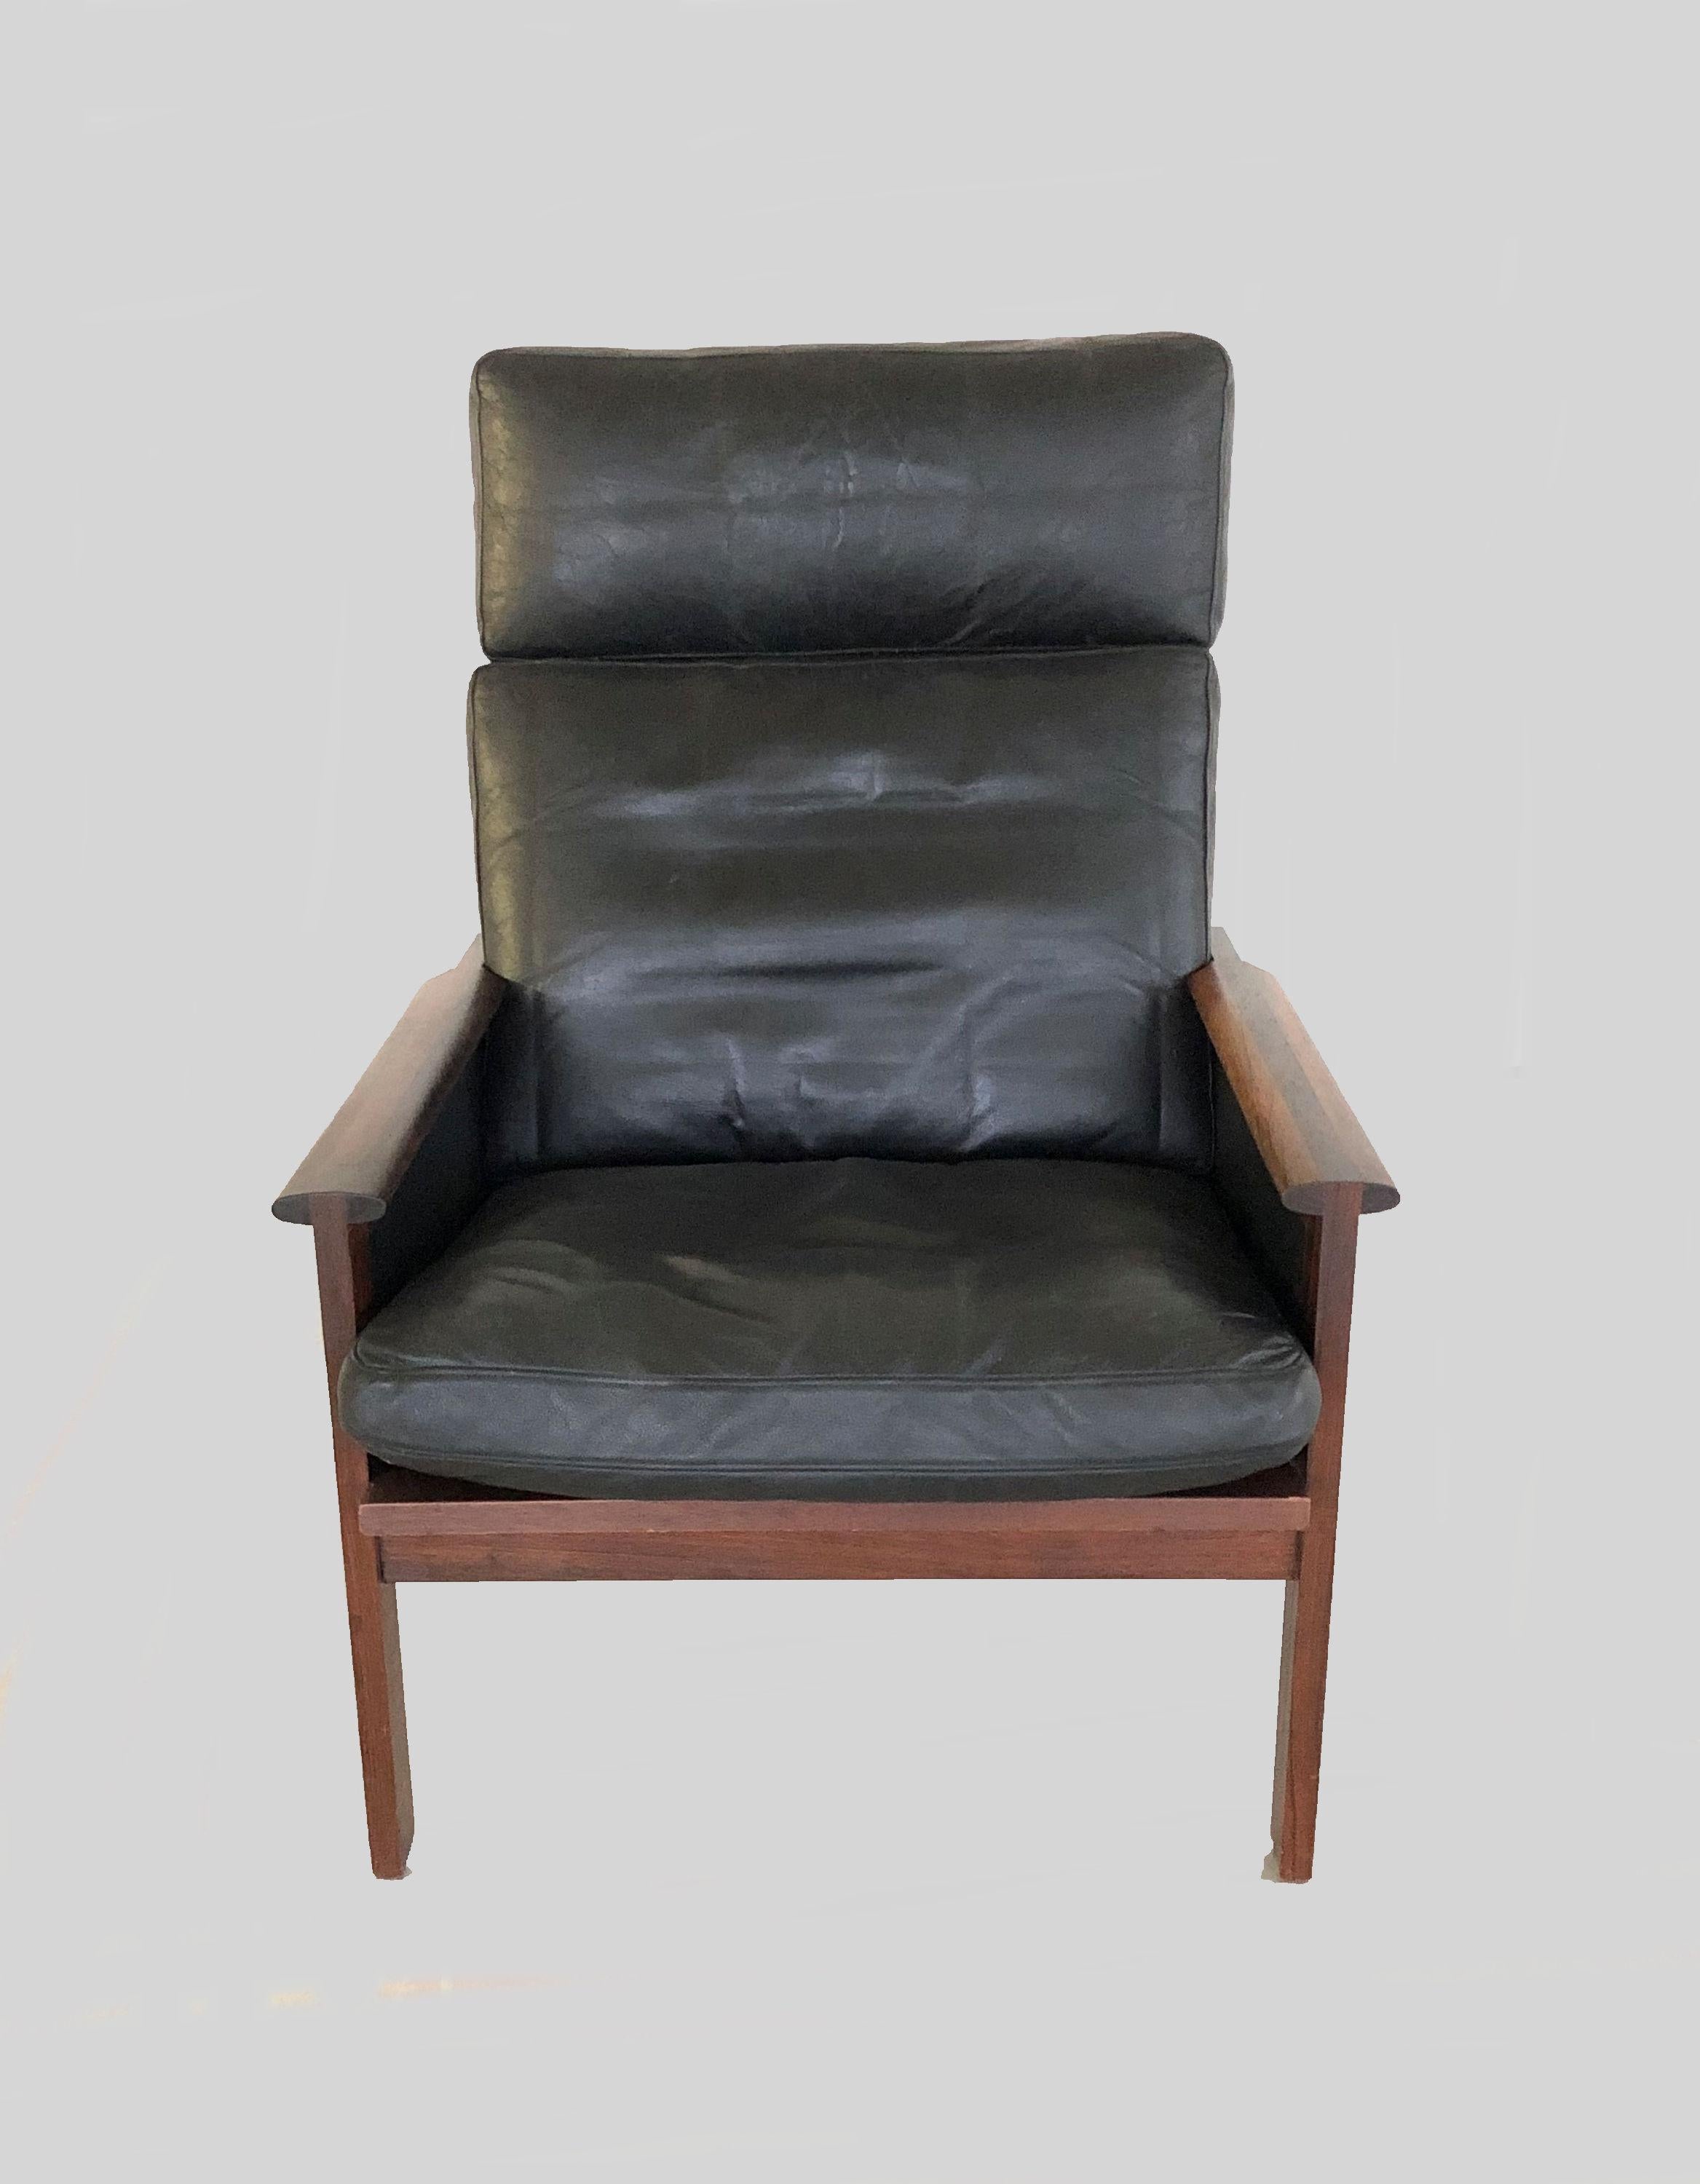 Illum Wikkelsø high back Capella lounge chair and ottoman designed by Illum Wikkelso in 1959 and manufactured in Denmark by Niels Eilersen. 

The comfortable and very well made lounge chair is made of solid rosewood with distinctive joinery on the